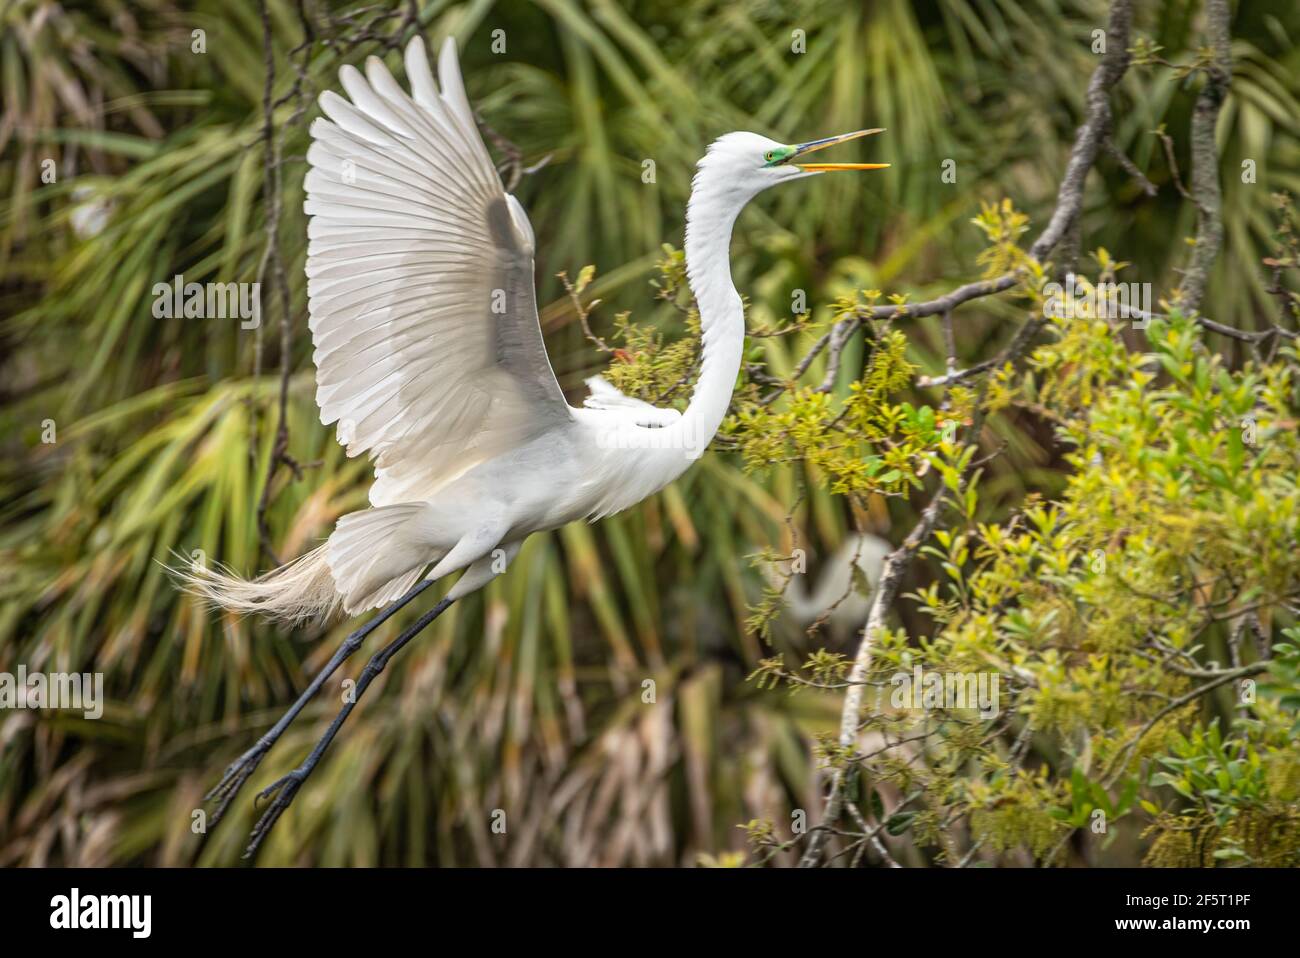 Great egret (Ardea alba) with breeding plumage in flight at a wading bird rookery in St. Augustine, Florida. (USA) Stock Photo